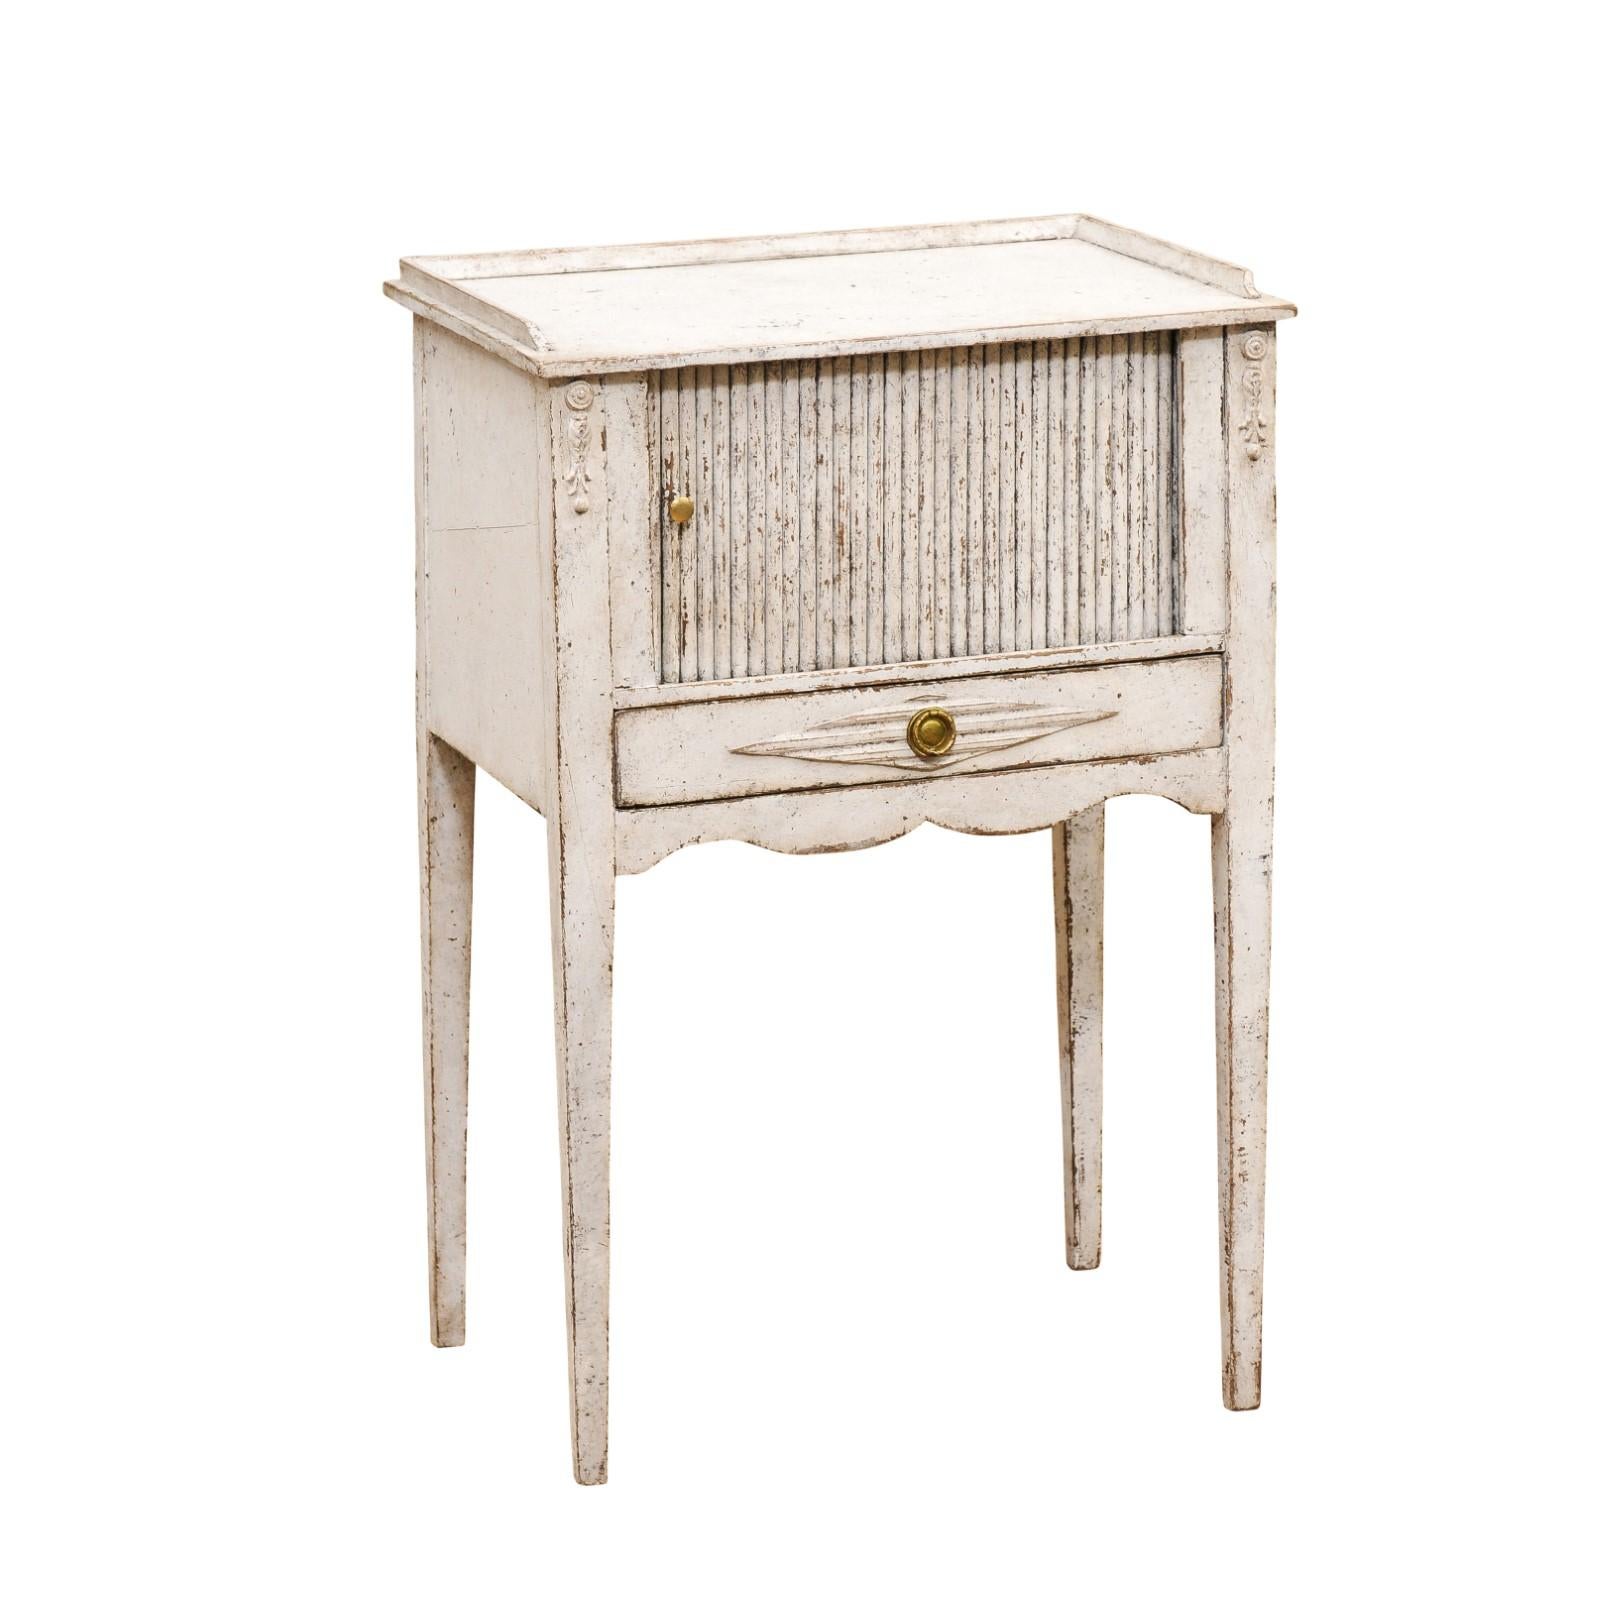 A Swedish painted wood lamp table from the late 19th century with tambour door and distressed patina. Created in Sweden during the last quarter of the 19th century, this lamp table features a rectangular top surrounded by a wooden three quarter